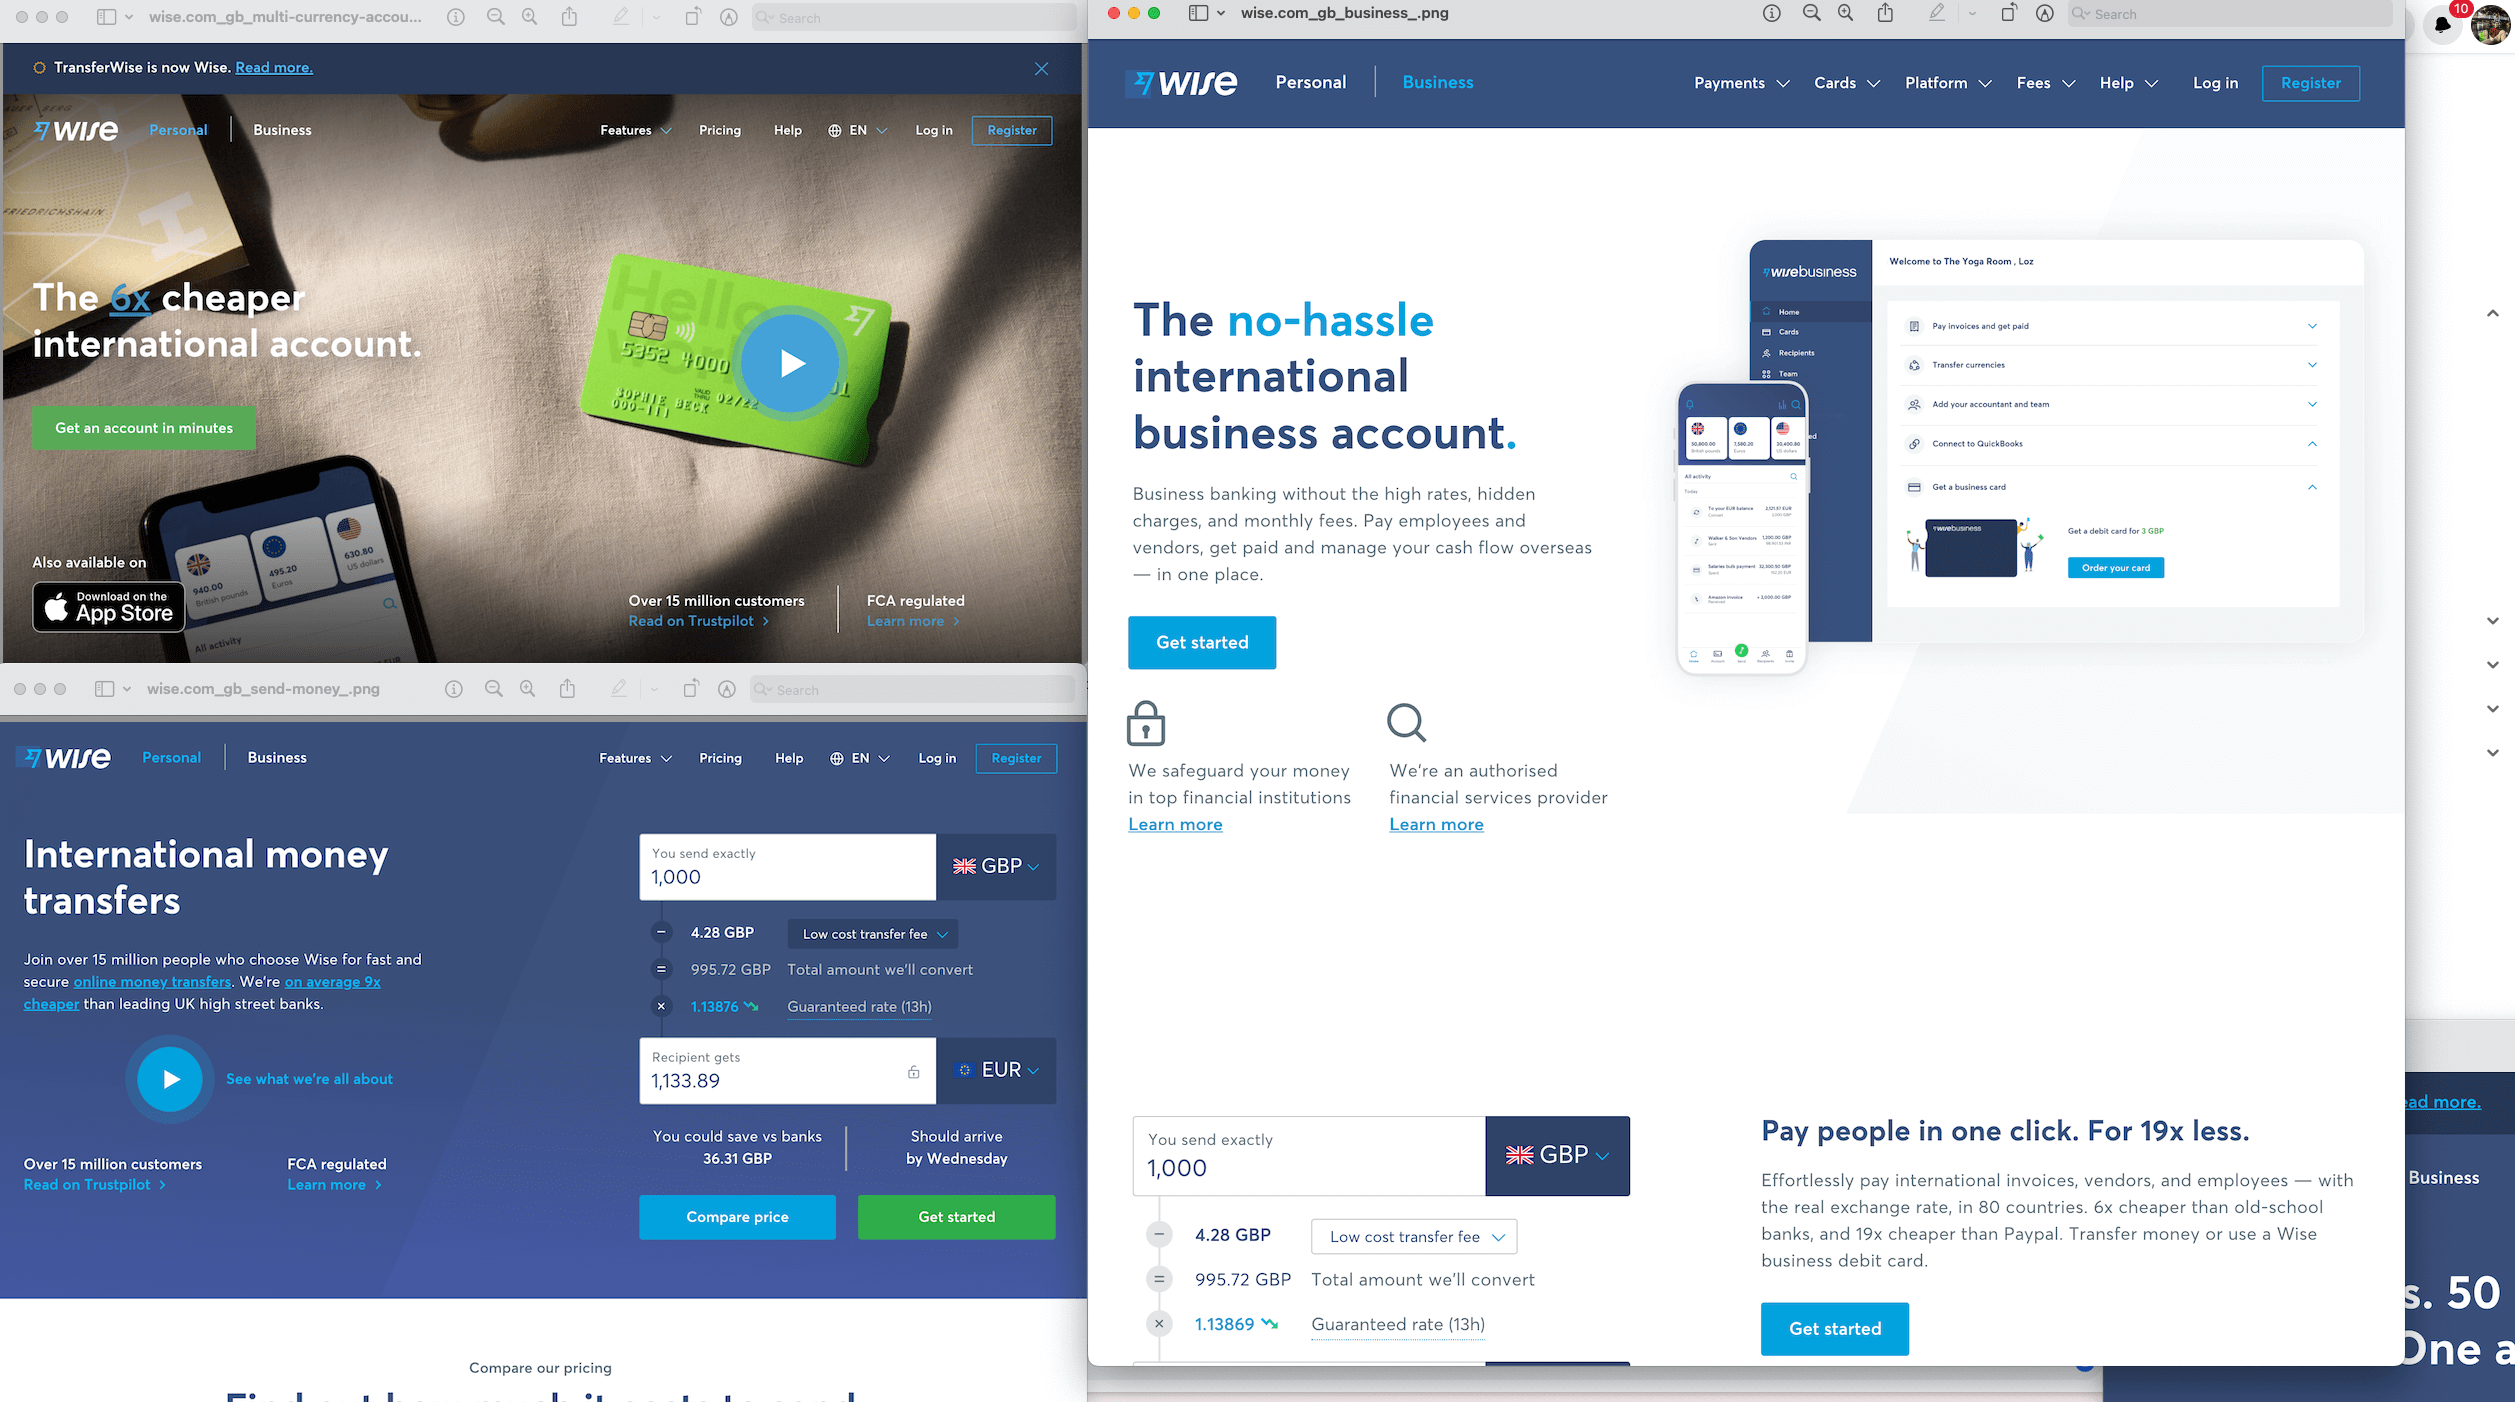 Screenshots of the old Wise website, a measured but well-worn look for a fintech